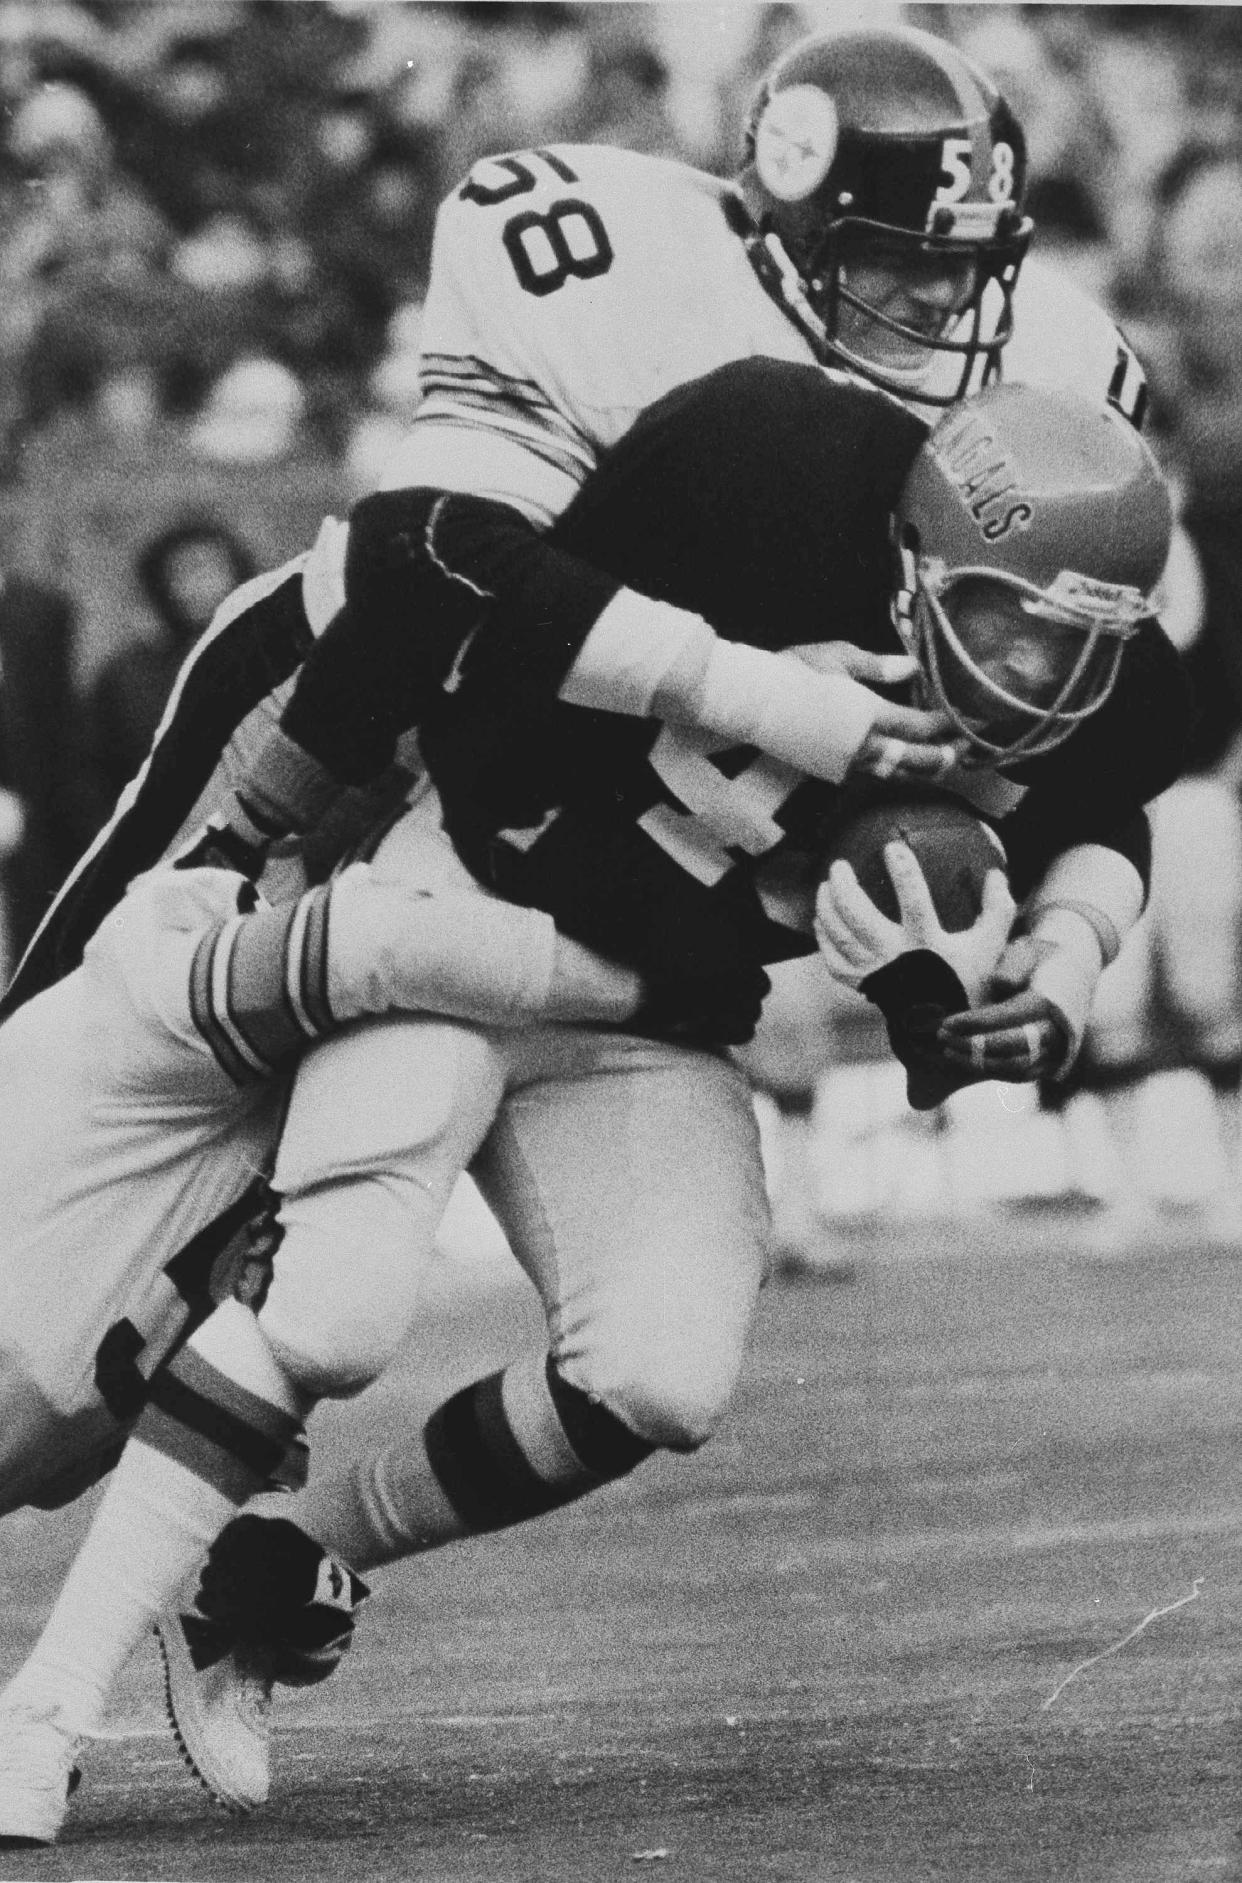 Steelers linebacker Jack Lambert tackles Bengals running back Archie Griffin during a game in 1977.